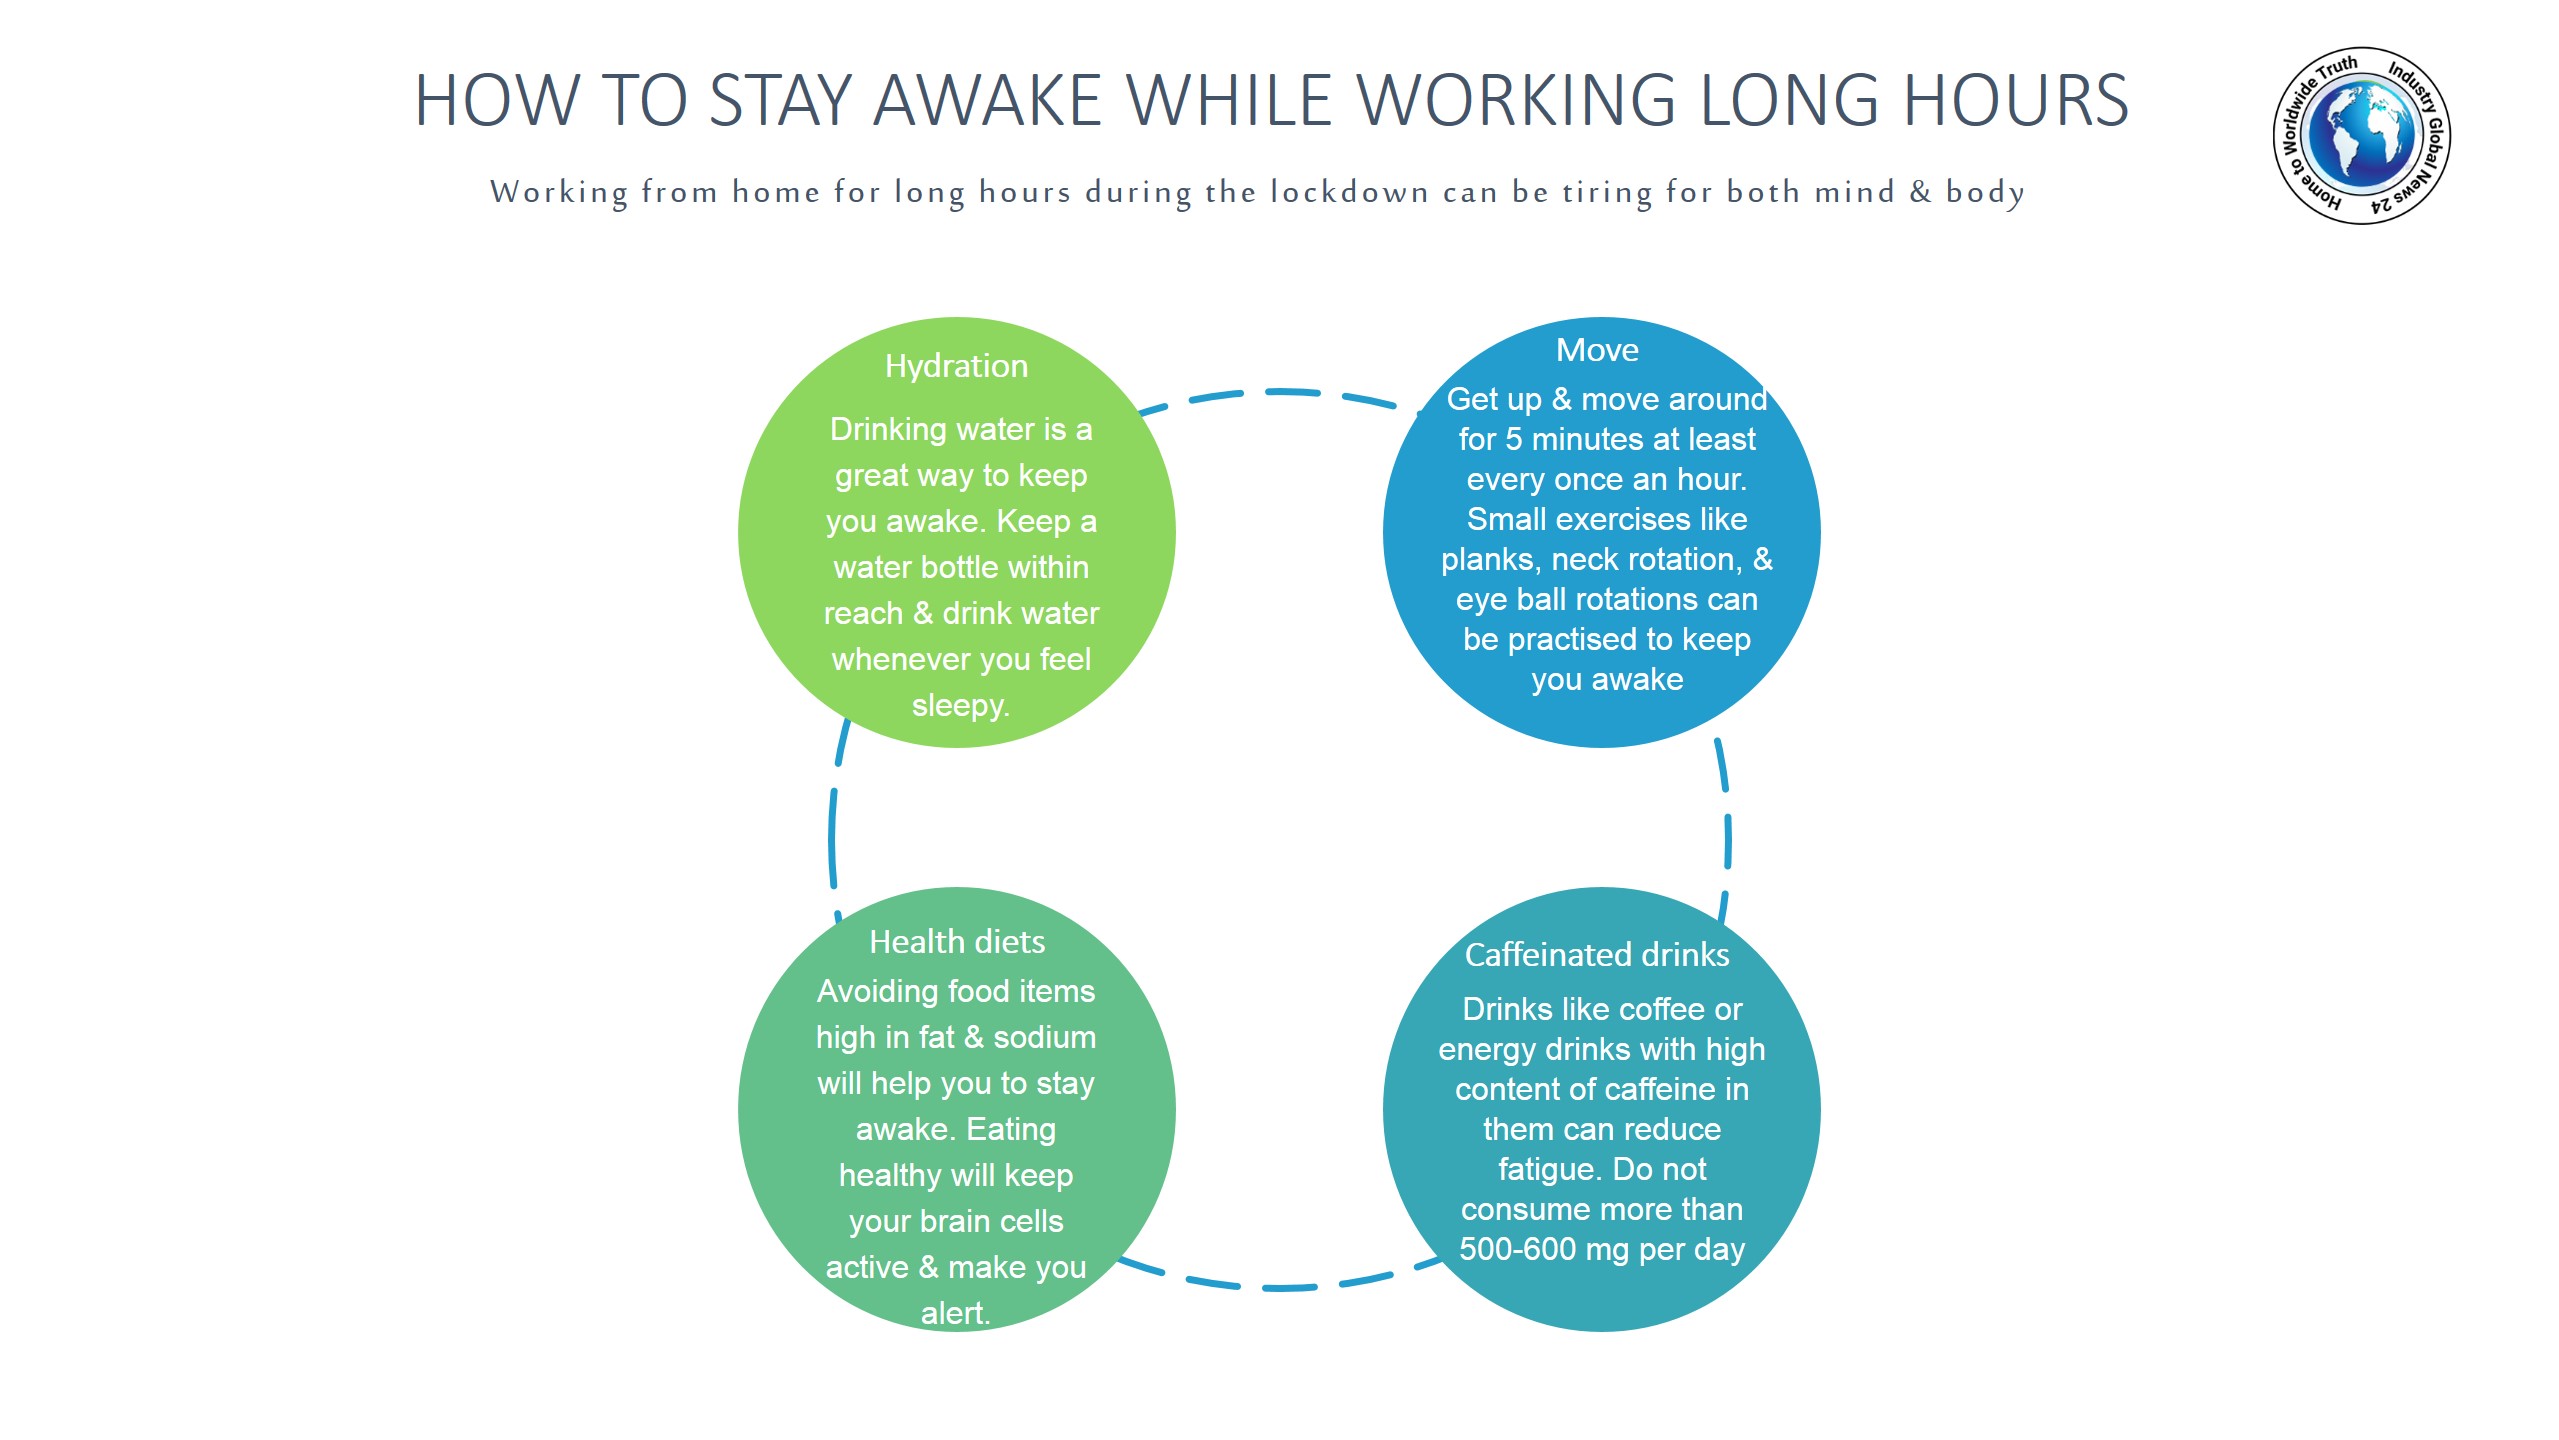 How to stay awake while working long hours